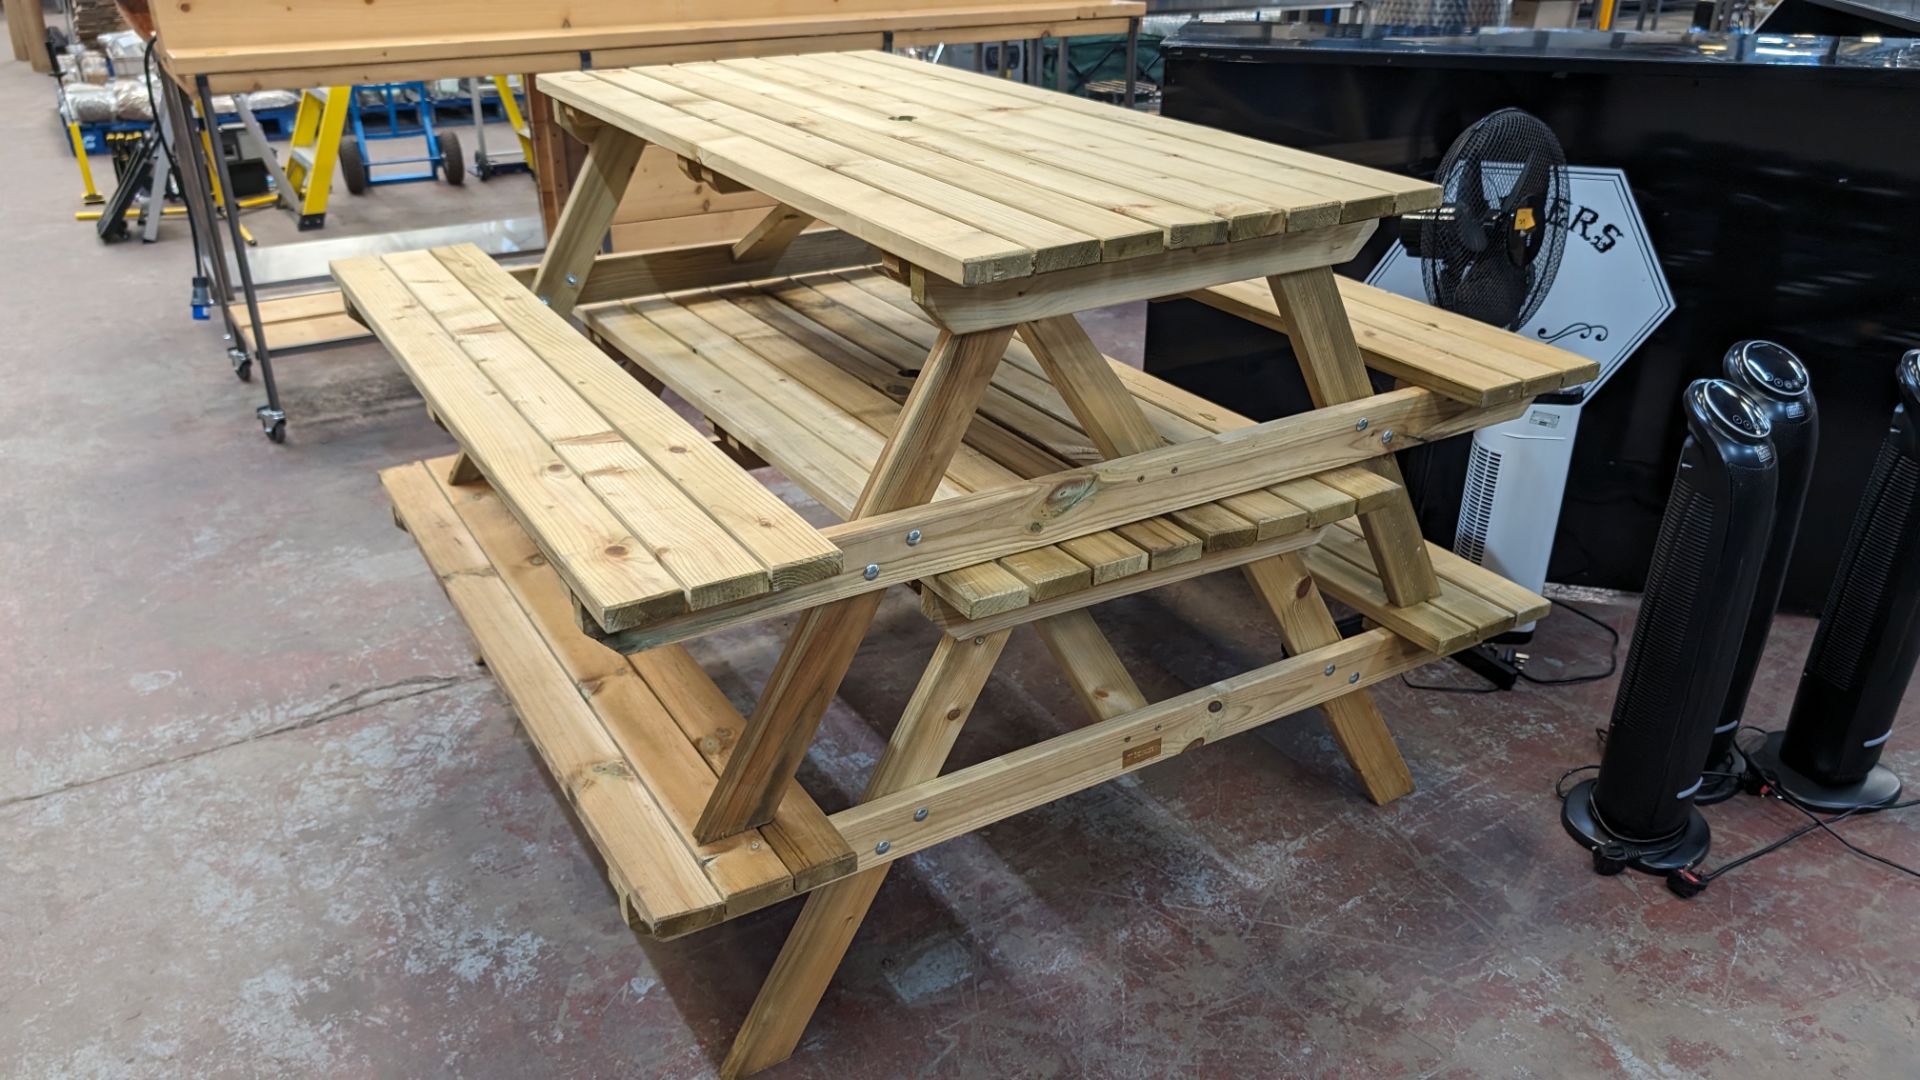 2 off Rowlinson wooden picnic benches, each with max dimensions including the seating sections of ap - Image 6 of 6